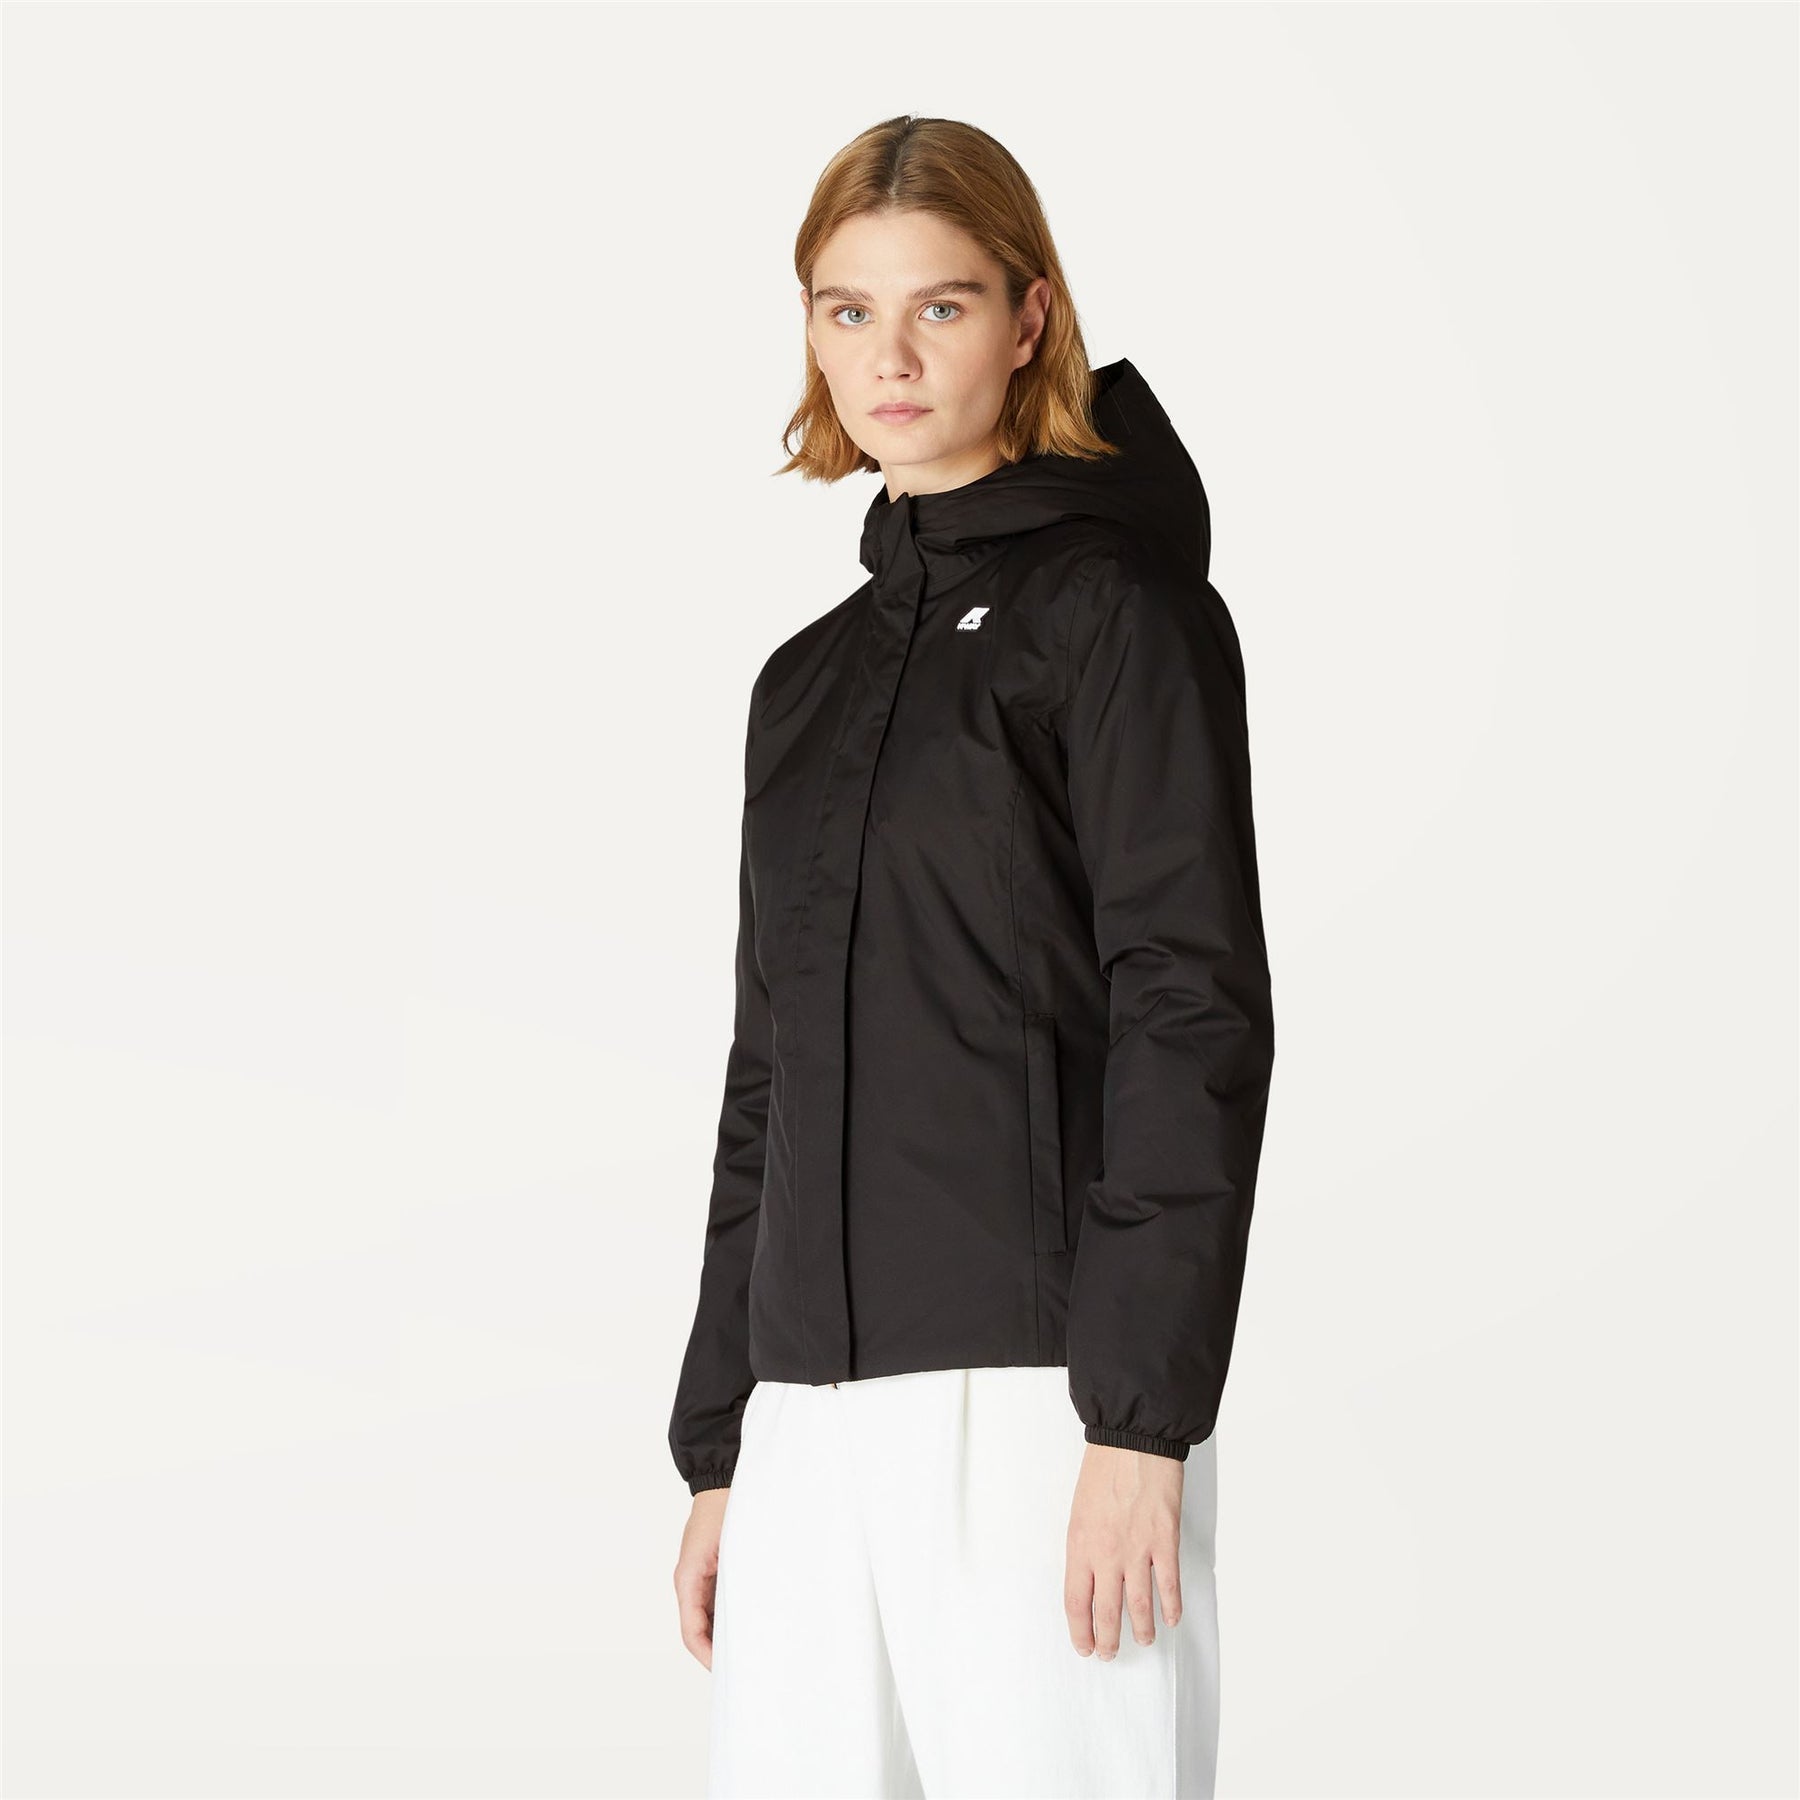 Lily Micro Ripstop Marmotta - Women Jacket in Black Pure - Blue DephtLily Micro Ripstop Marmotta - Women Jacket in Black Pure - Blue Depht